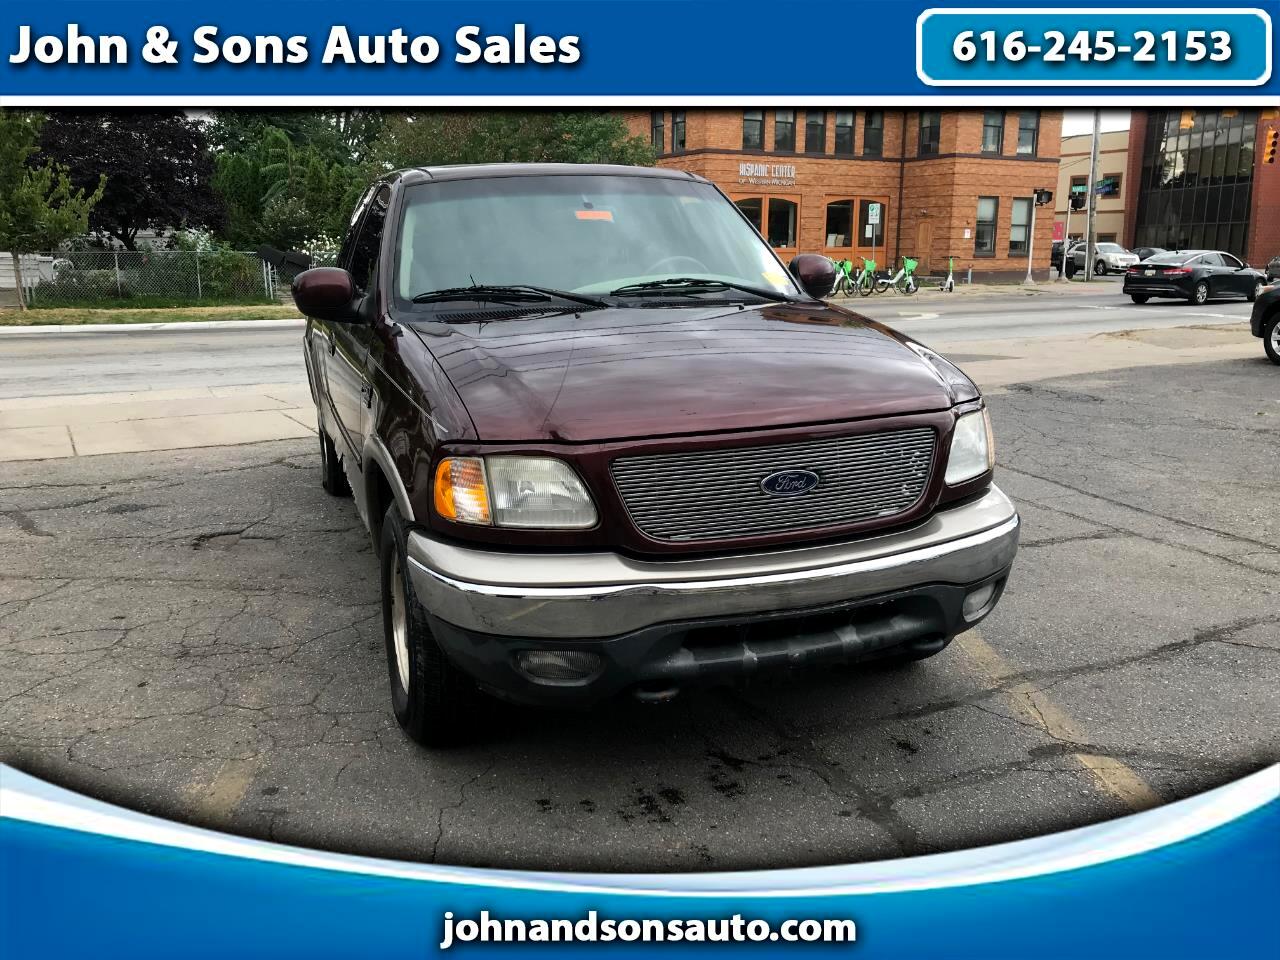 Ford F-150 Lariat SuperCab Long Bed 4WD 2001